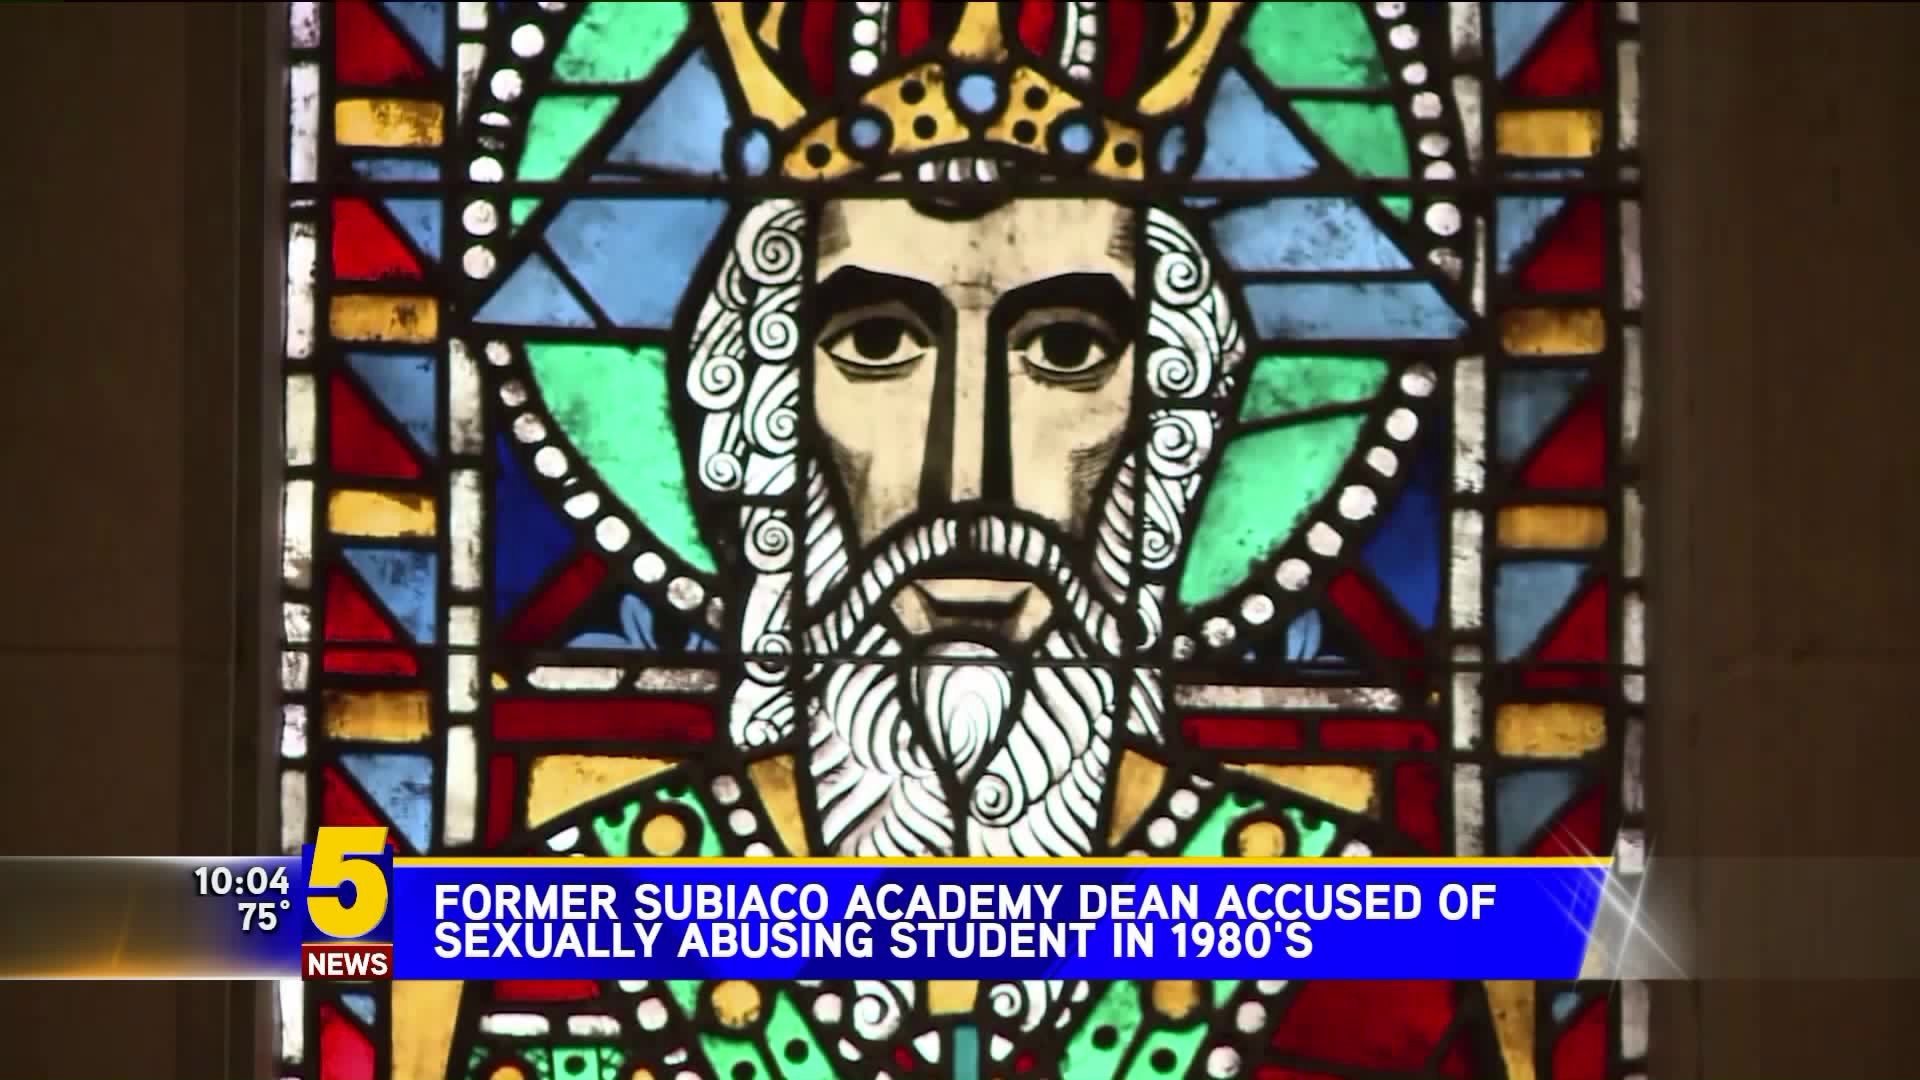 Former Subiaco Academy Dean Accused of Sexually Abusing Student